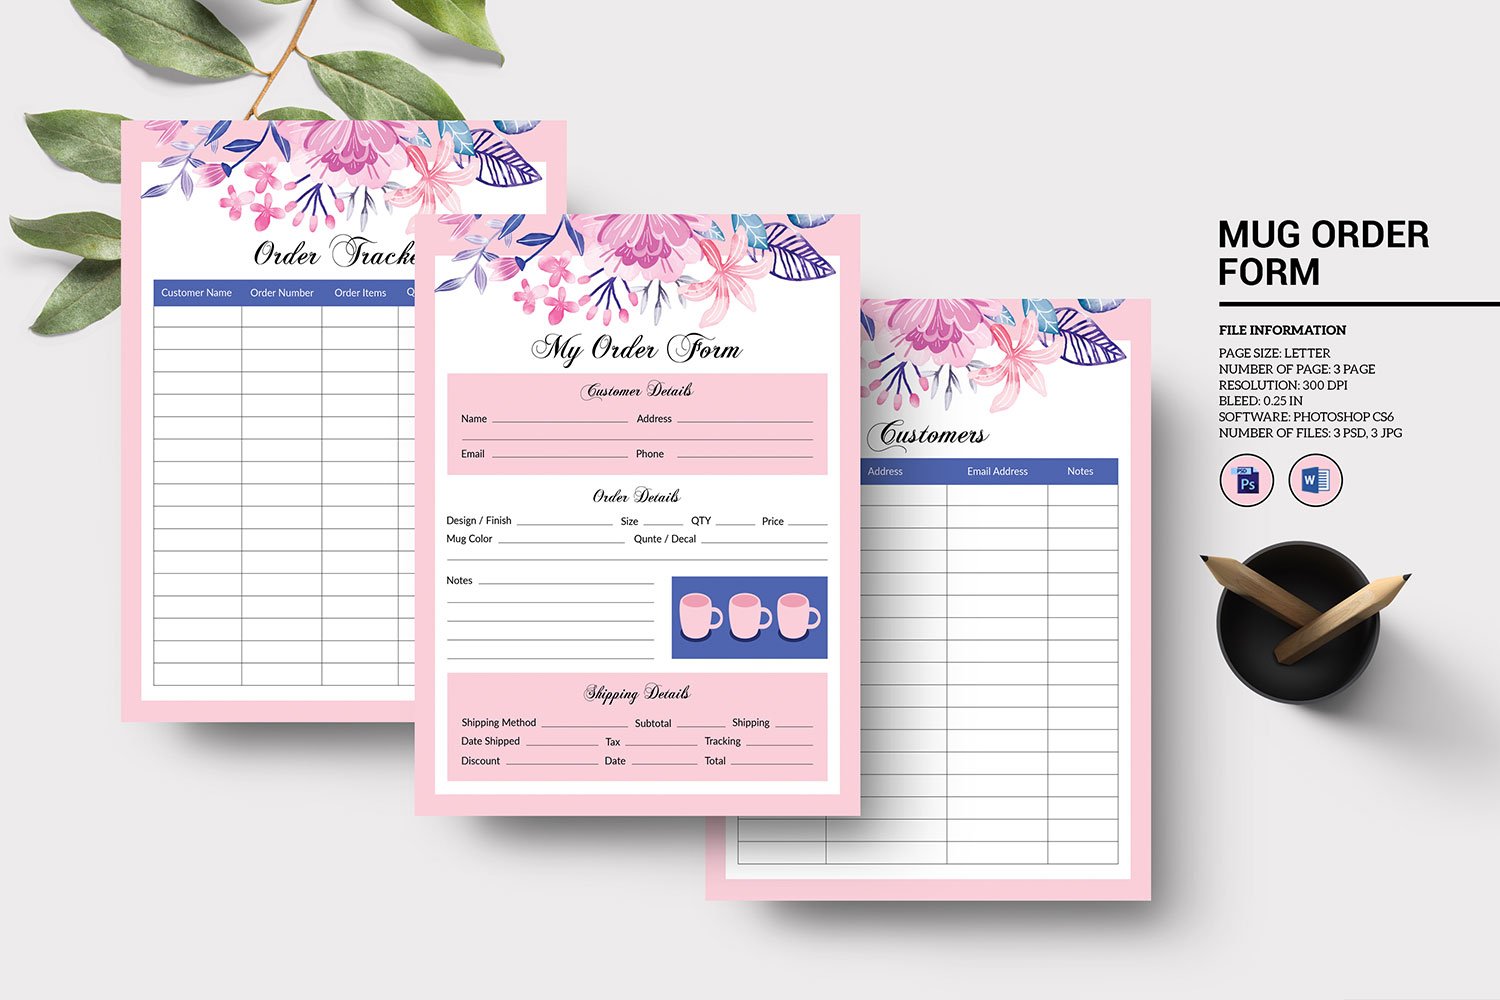 Printable Order Form cover image.